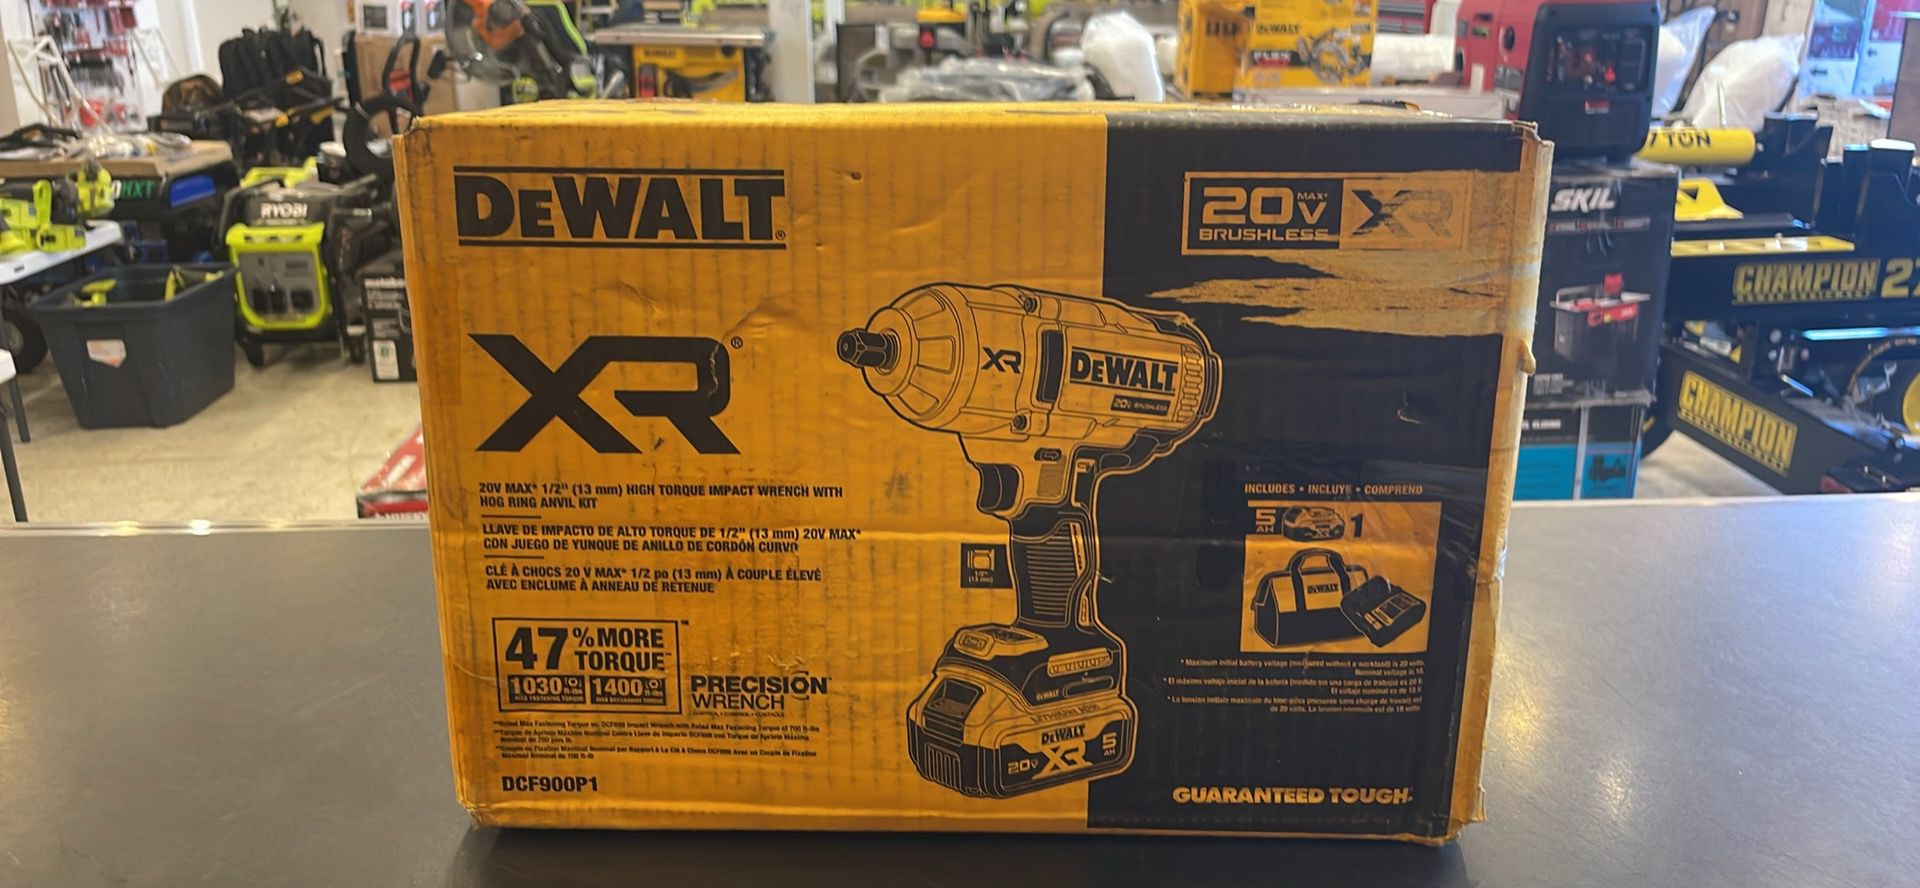 DEWALT 20V MAX Lithium-Ion Cordless 1/2 in. Impact Wrench Kit DCF900P1